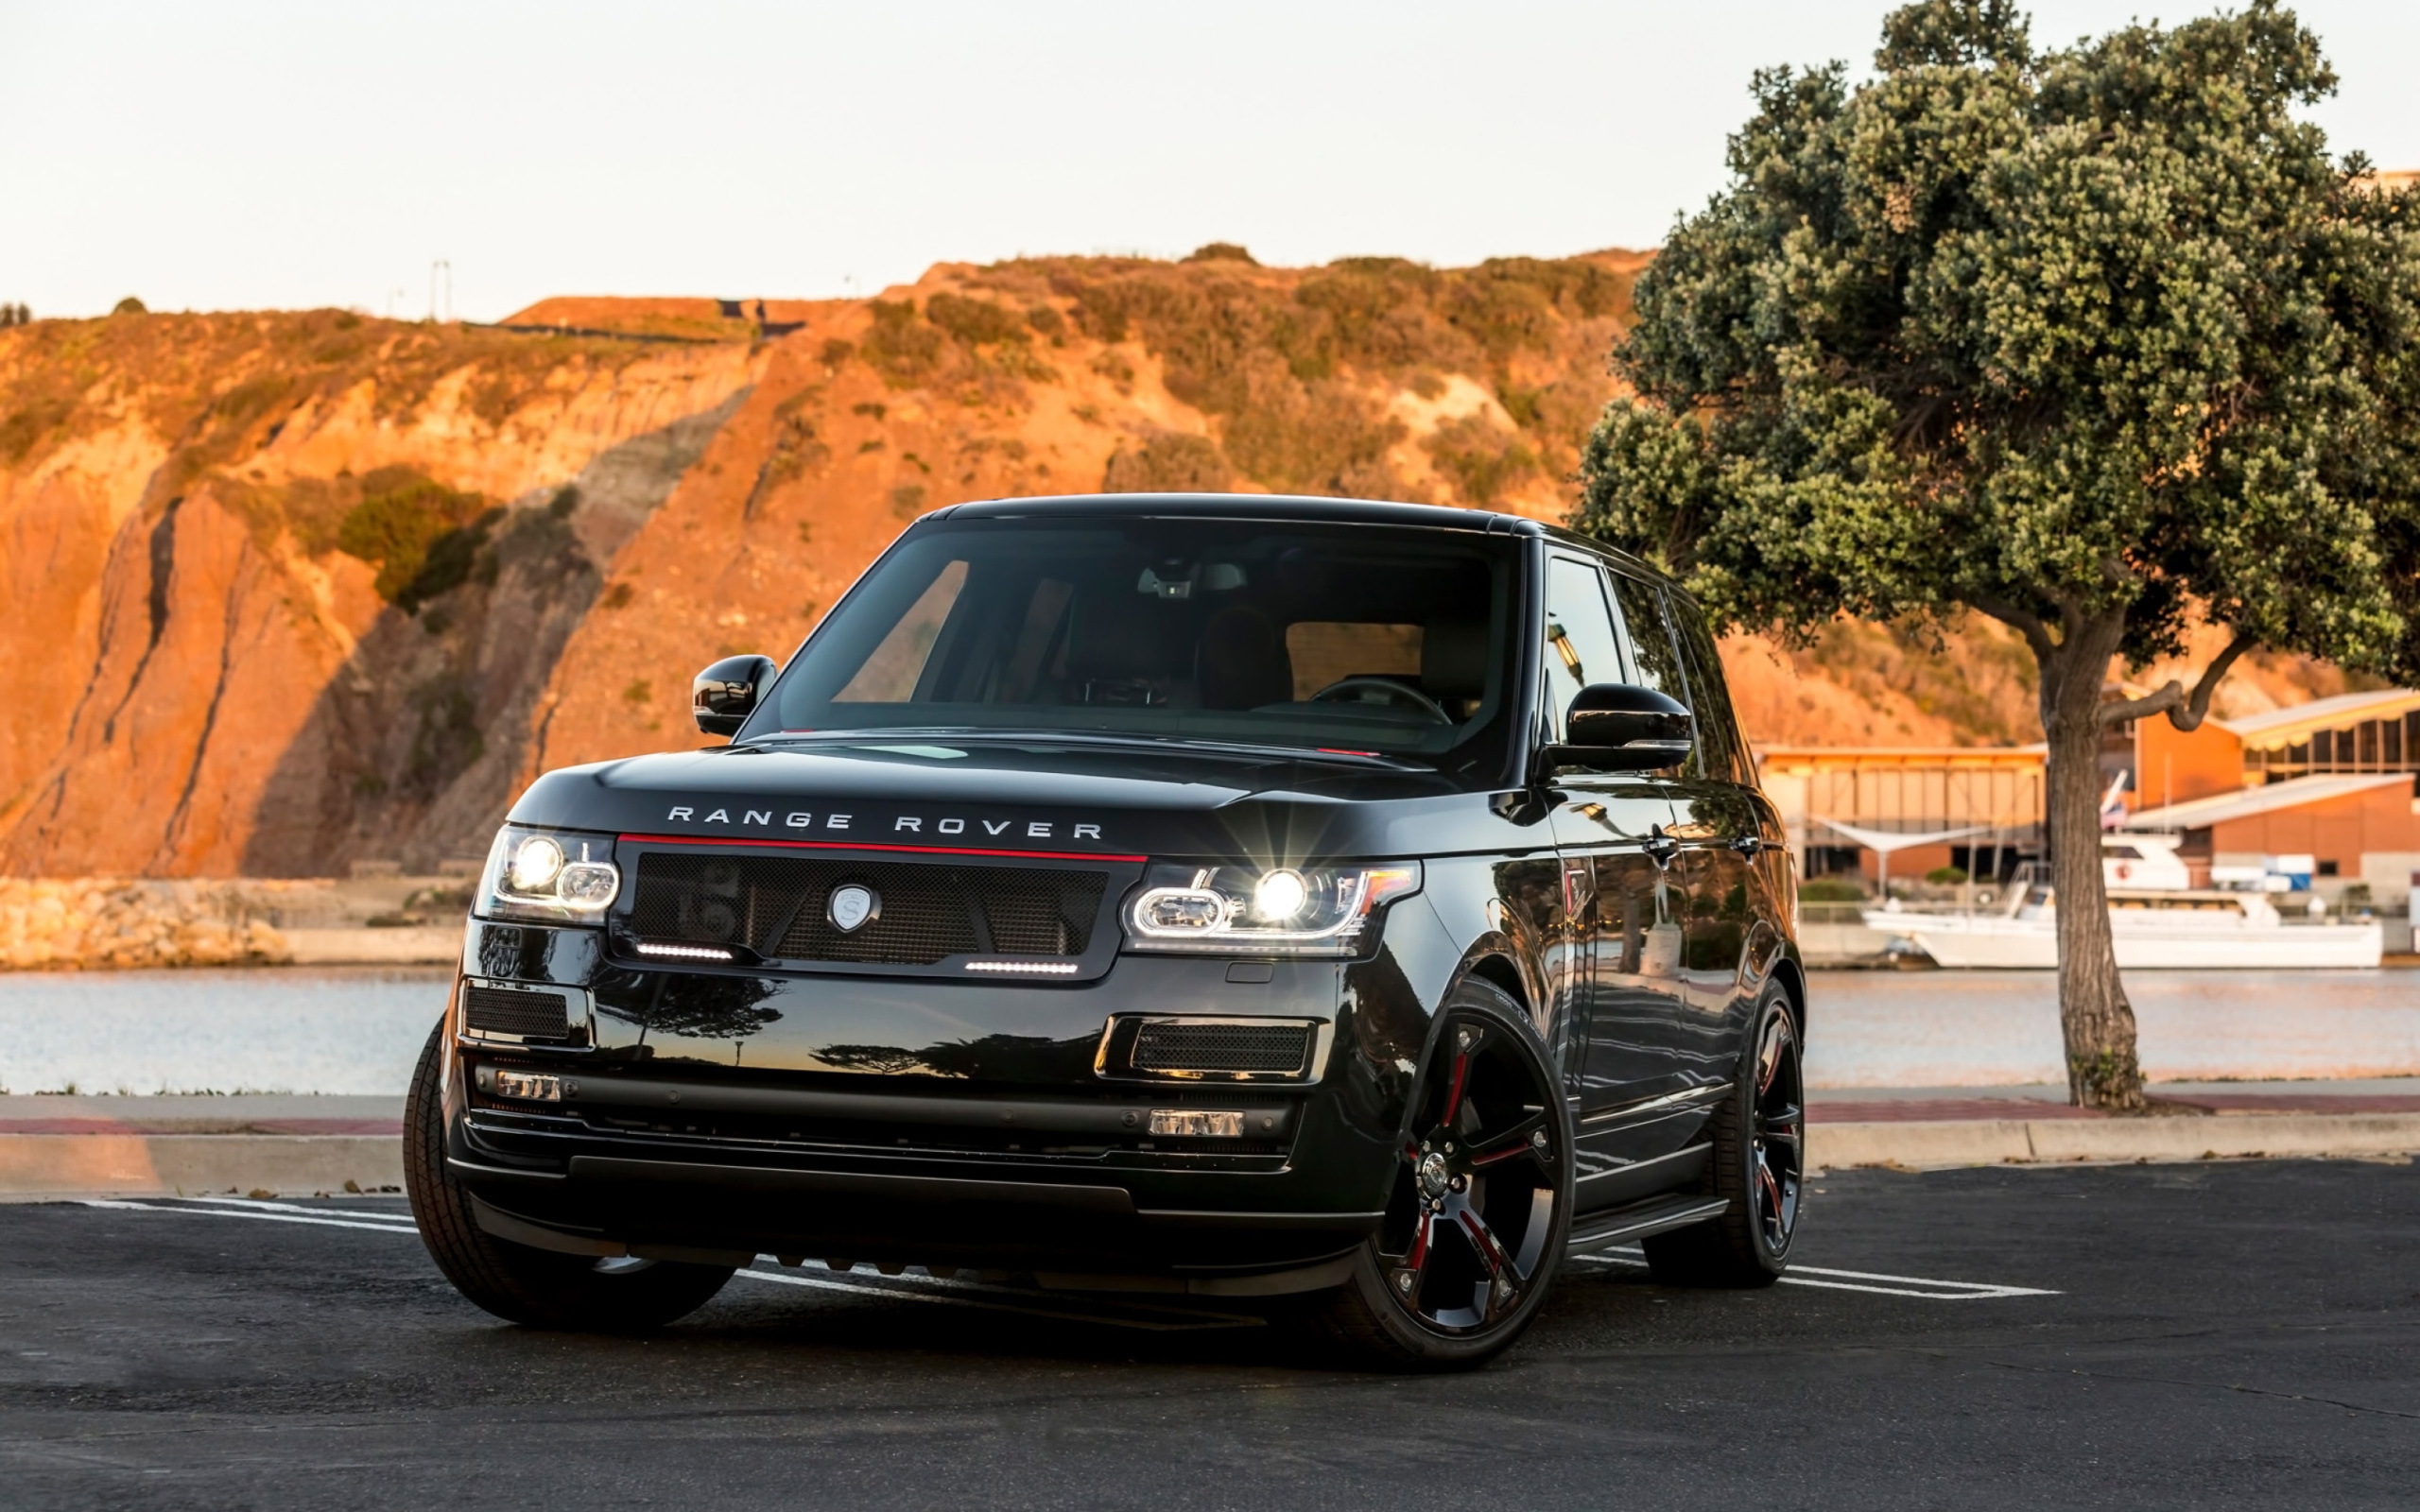 Range Rover STRUT with Grille Package wallpaper 2560x1600